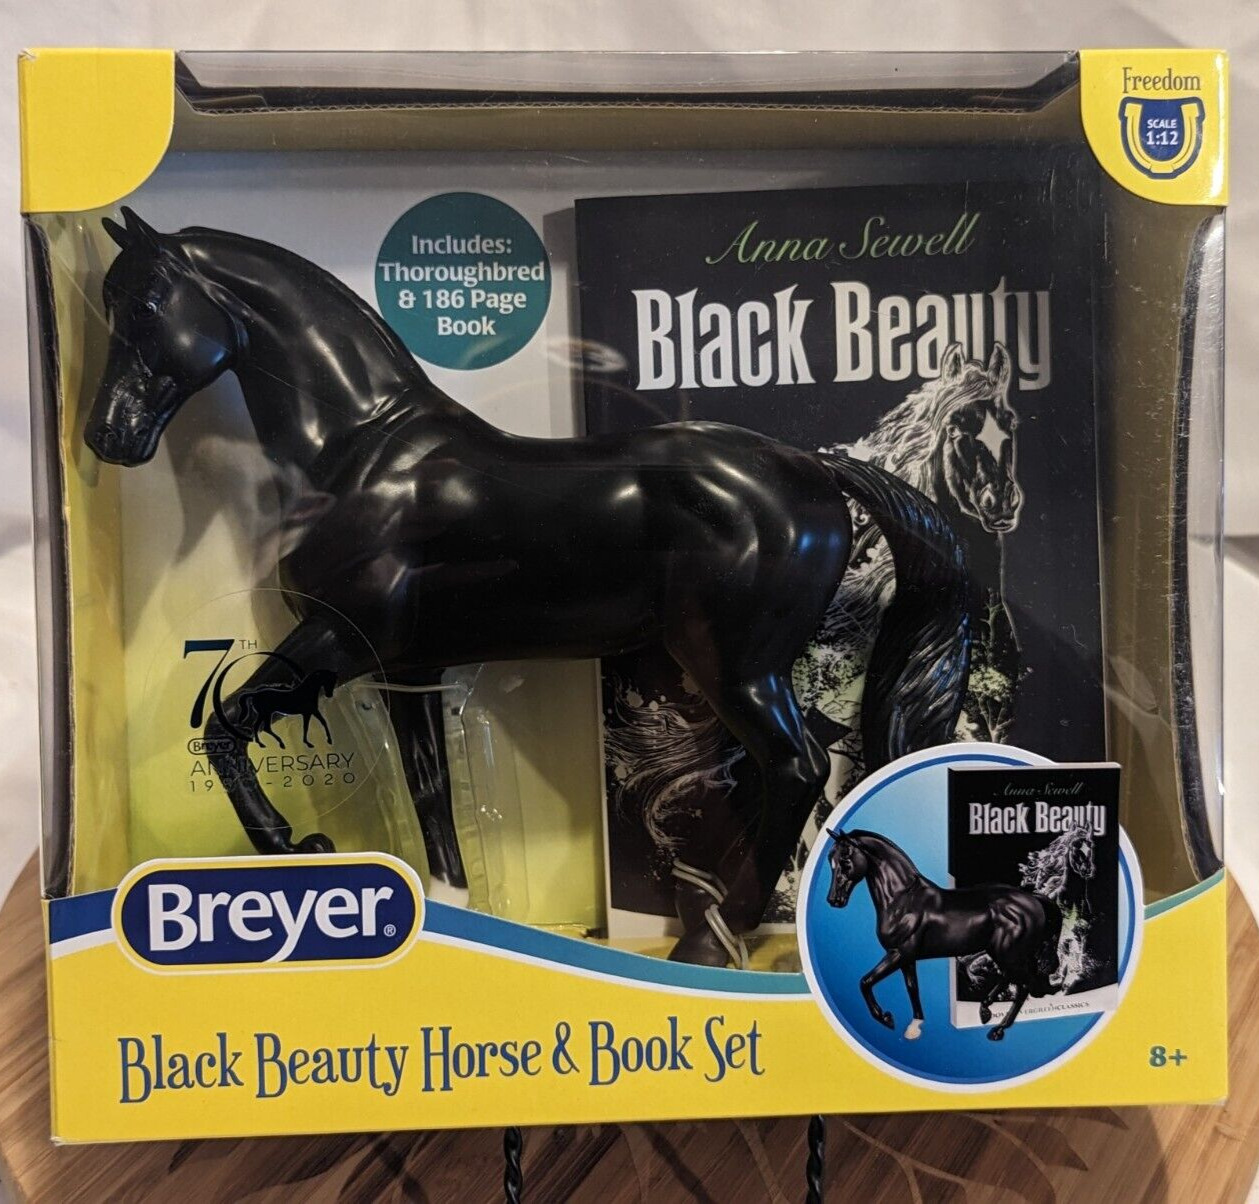 Breyer Classics Black Beauty Horse and Book Set (1:12 Scale) Freedom Series